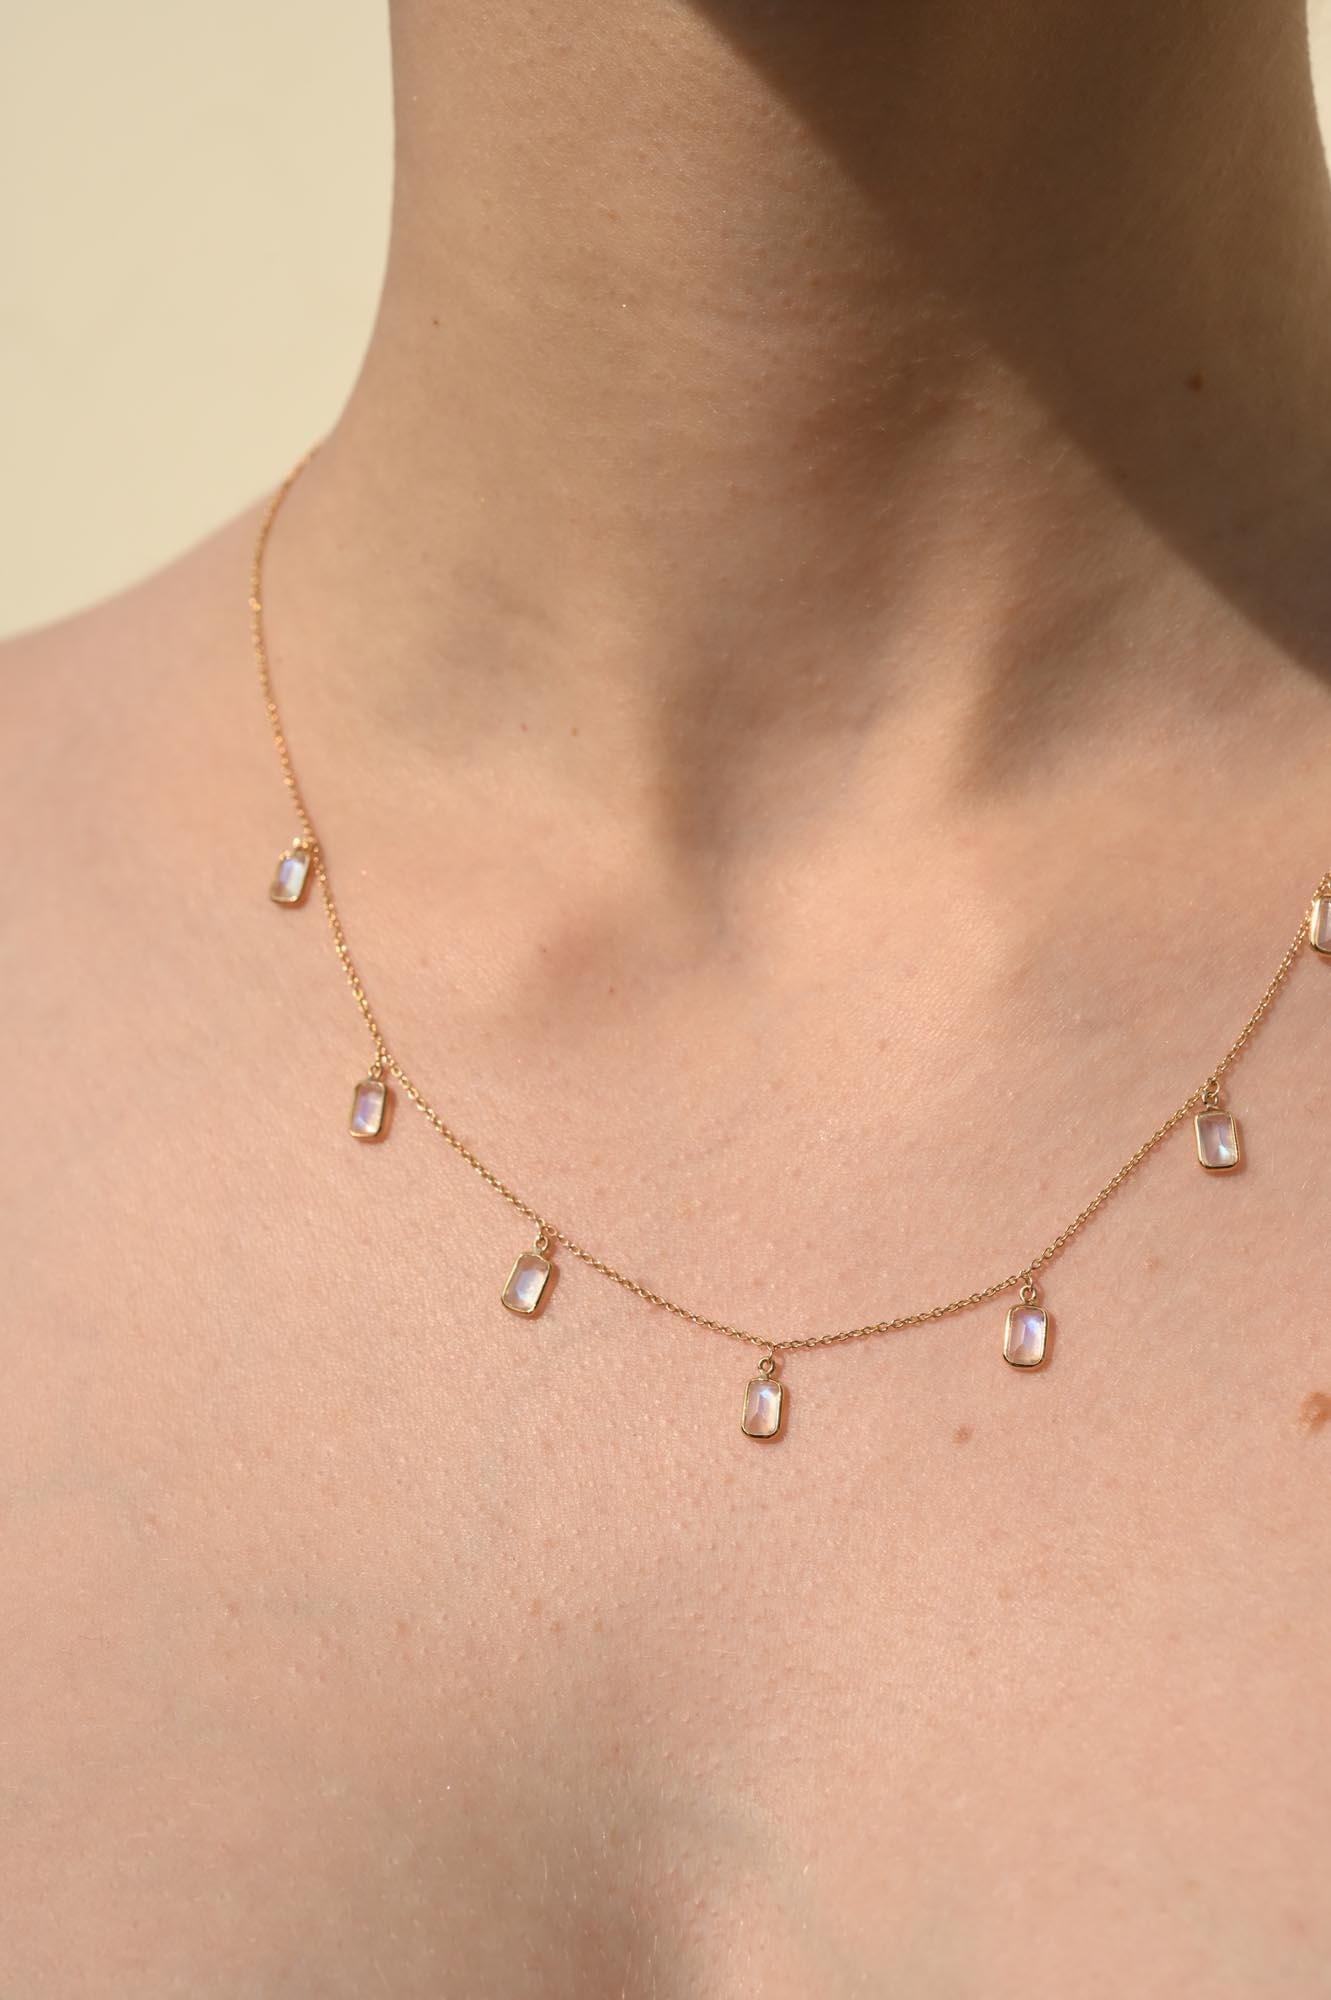 Rainbow Moonstone Chain Necklace Gift for Girlfriend in 18k Solid Yellow Gold For Sale 3